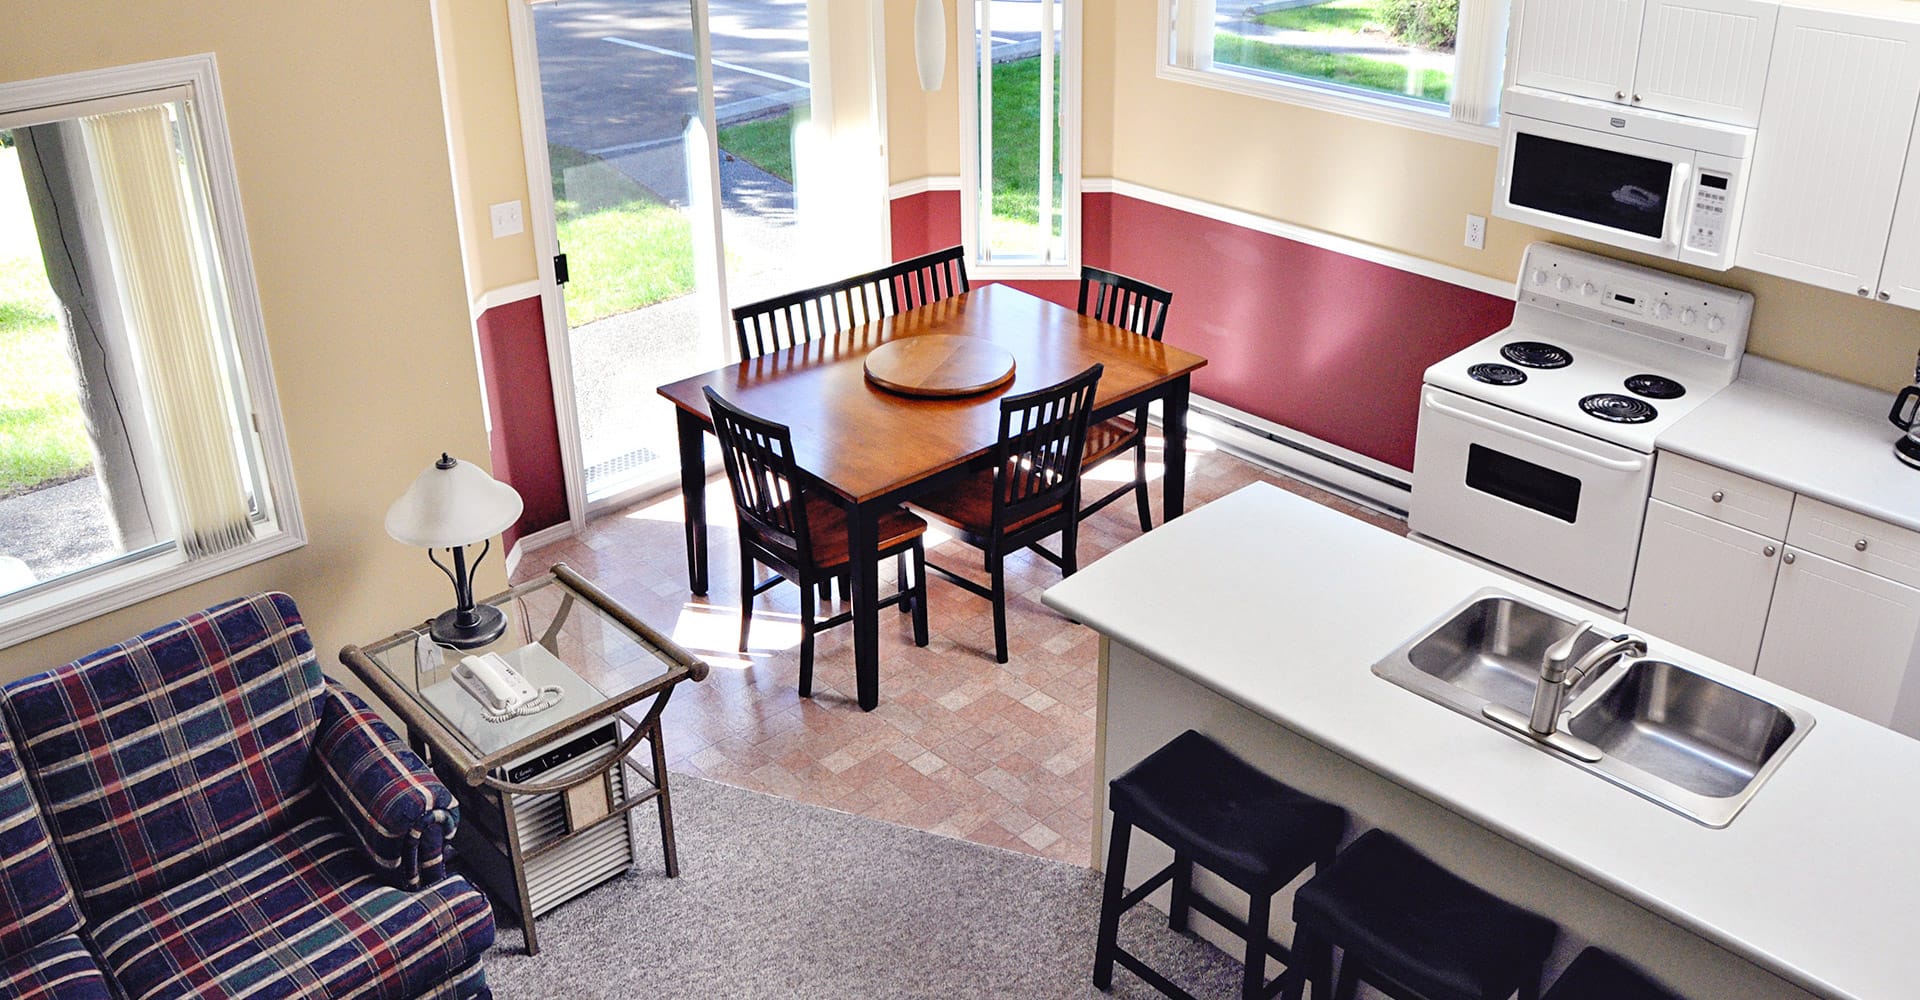 Kitchen and dining area in condo at Ocean Trails Resort